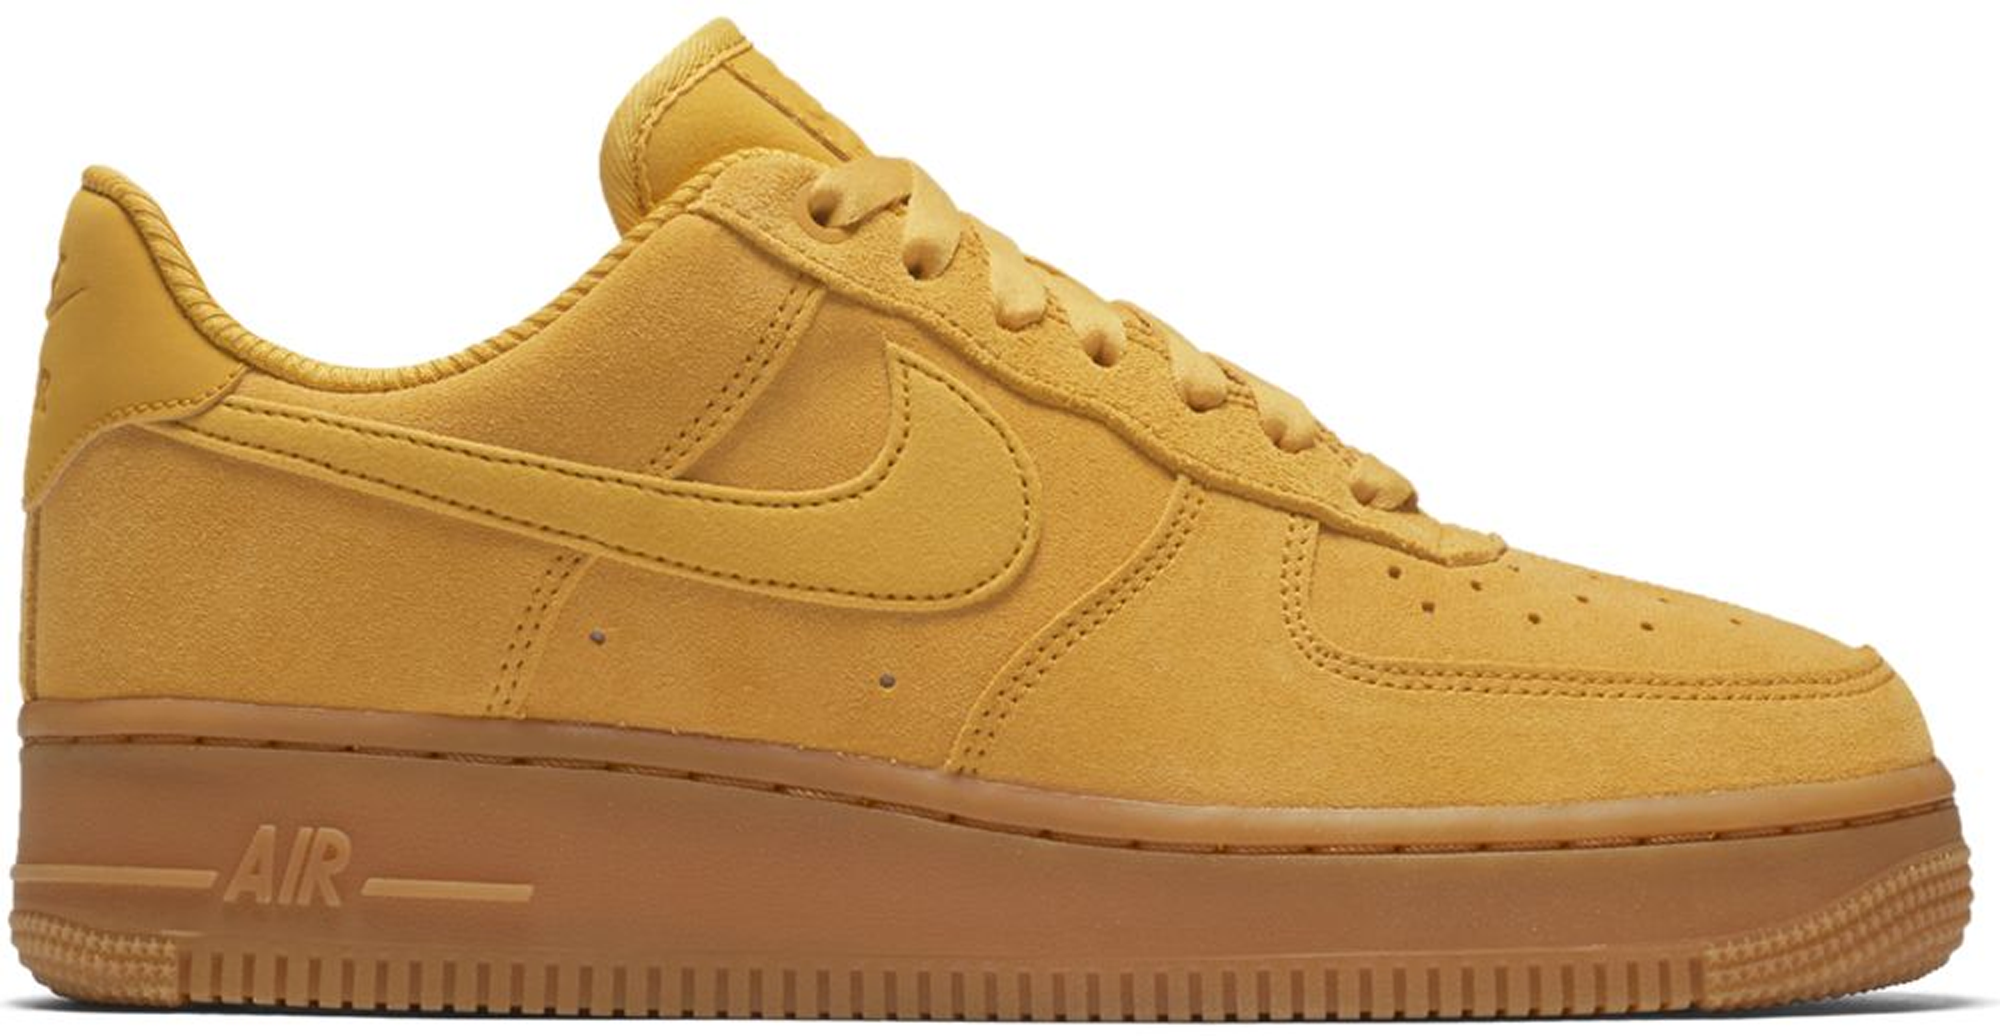 Nike Air Force 1 Low Mineral Yellow Gum 